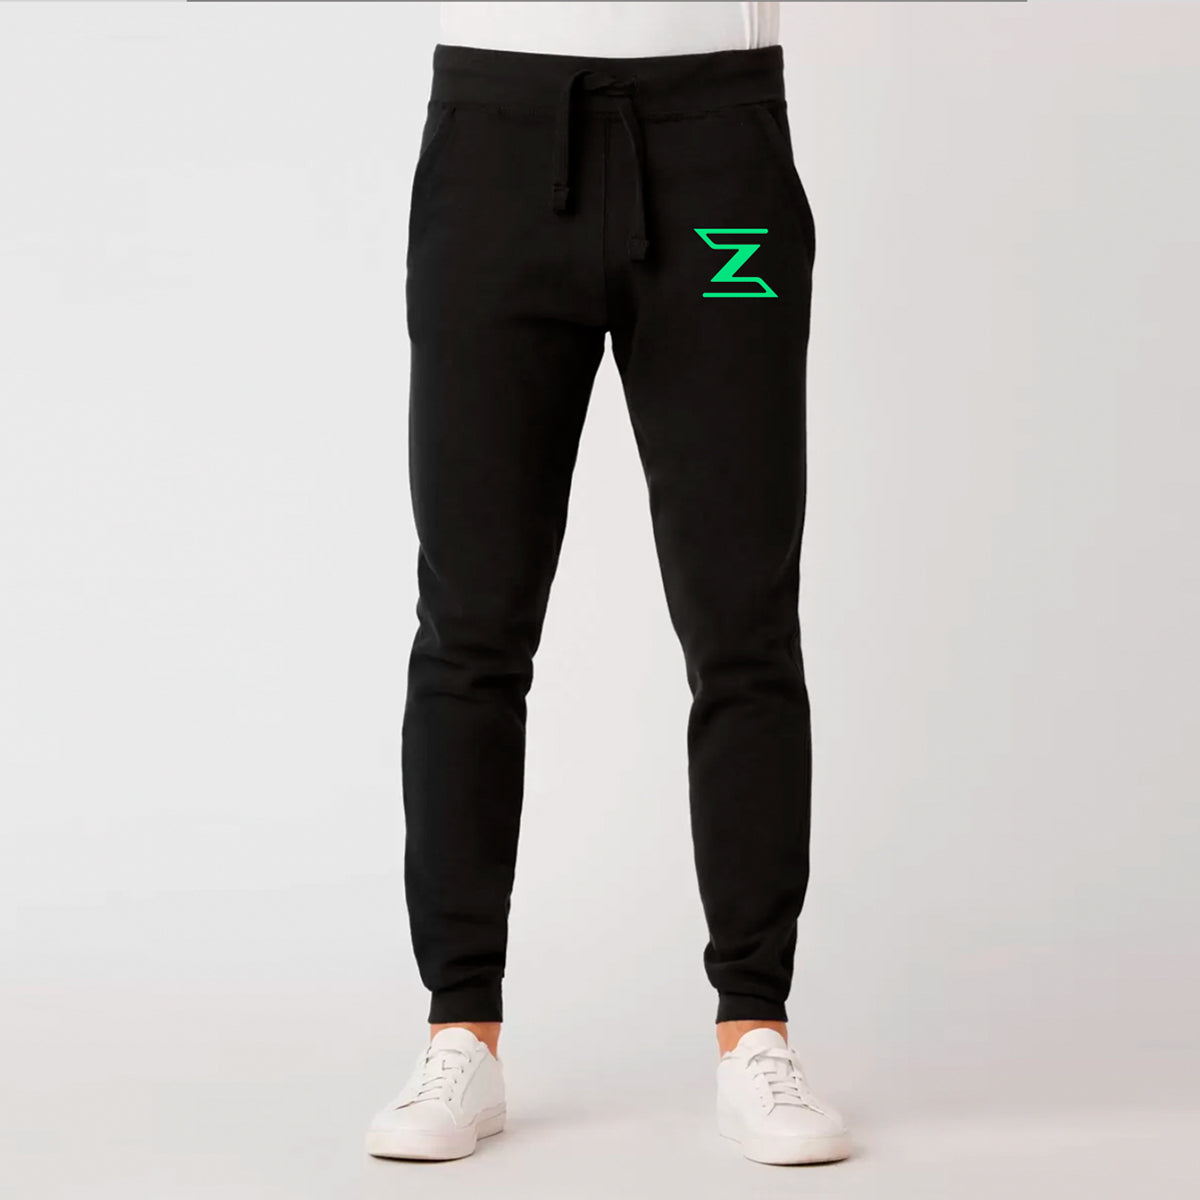 Zachdubs Embroidered Joggers